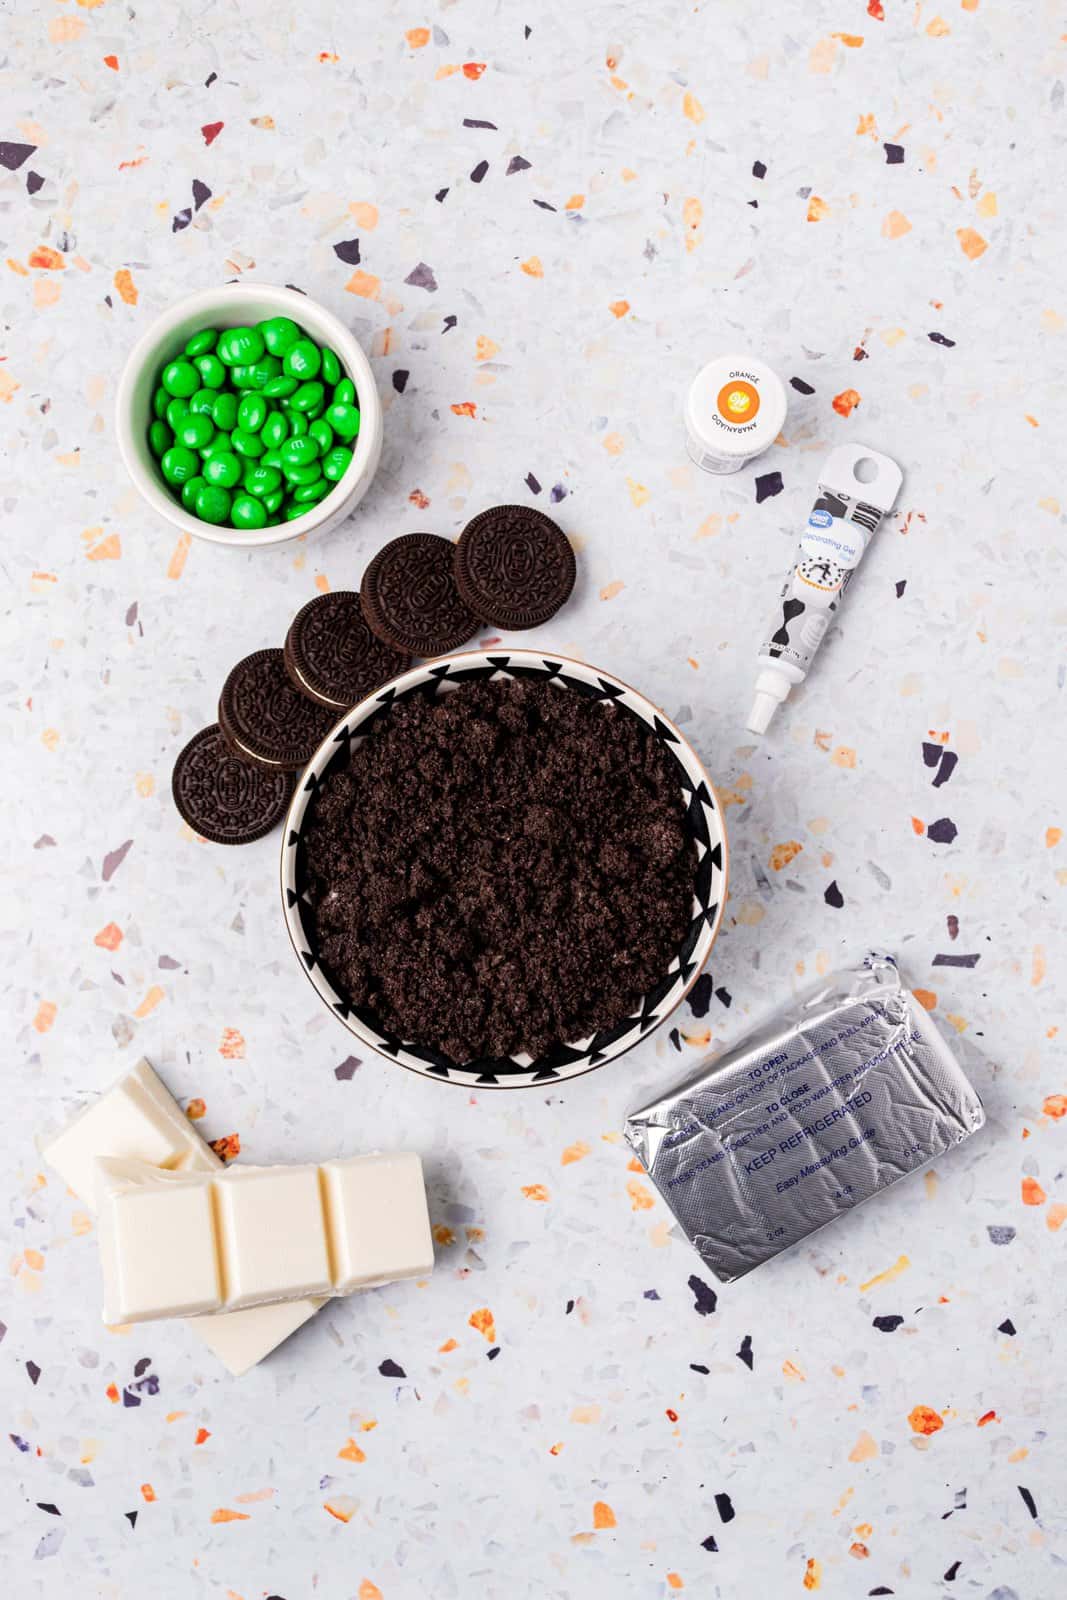 Ingredients needed: Double Stuf Oreos, cream cheese, white almond bark, orange food coloring, green M&M’s and black gel icing.